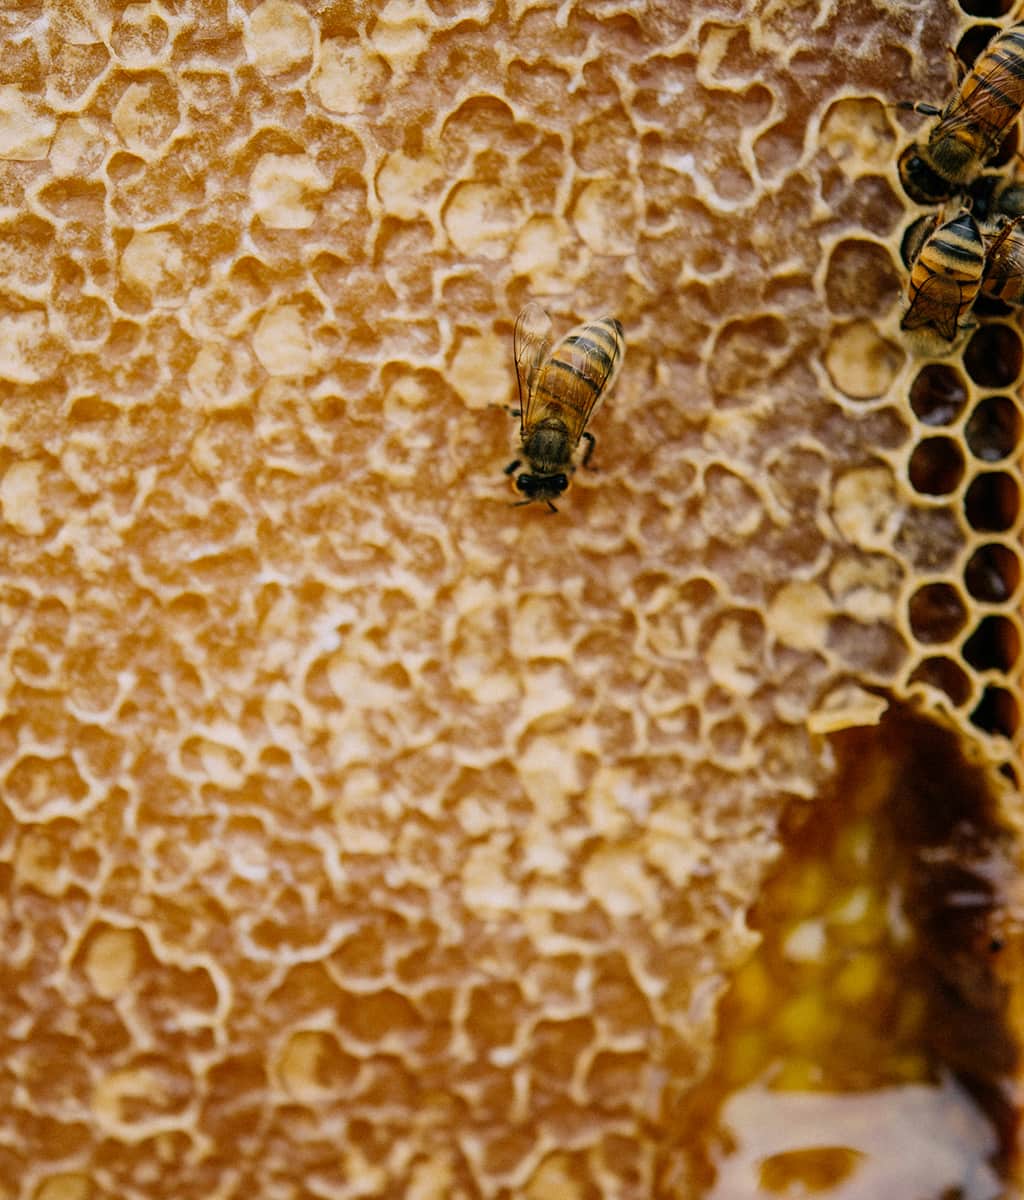 Bees sucking on honeycombs